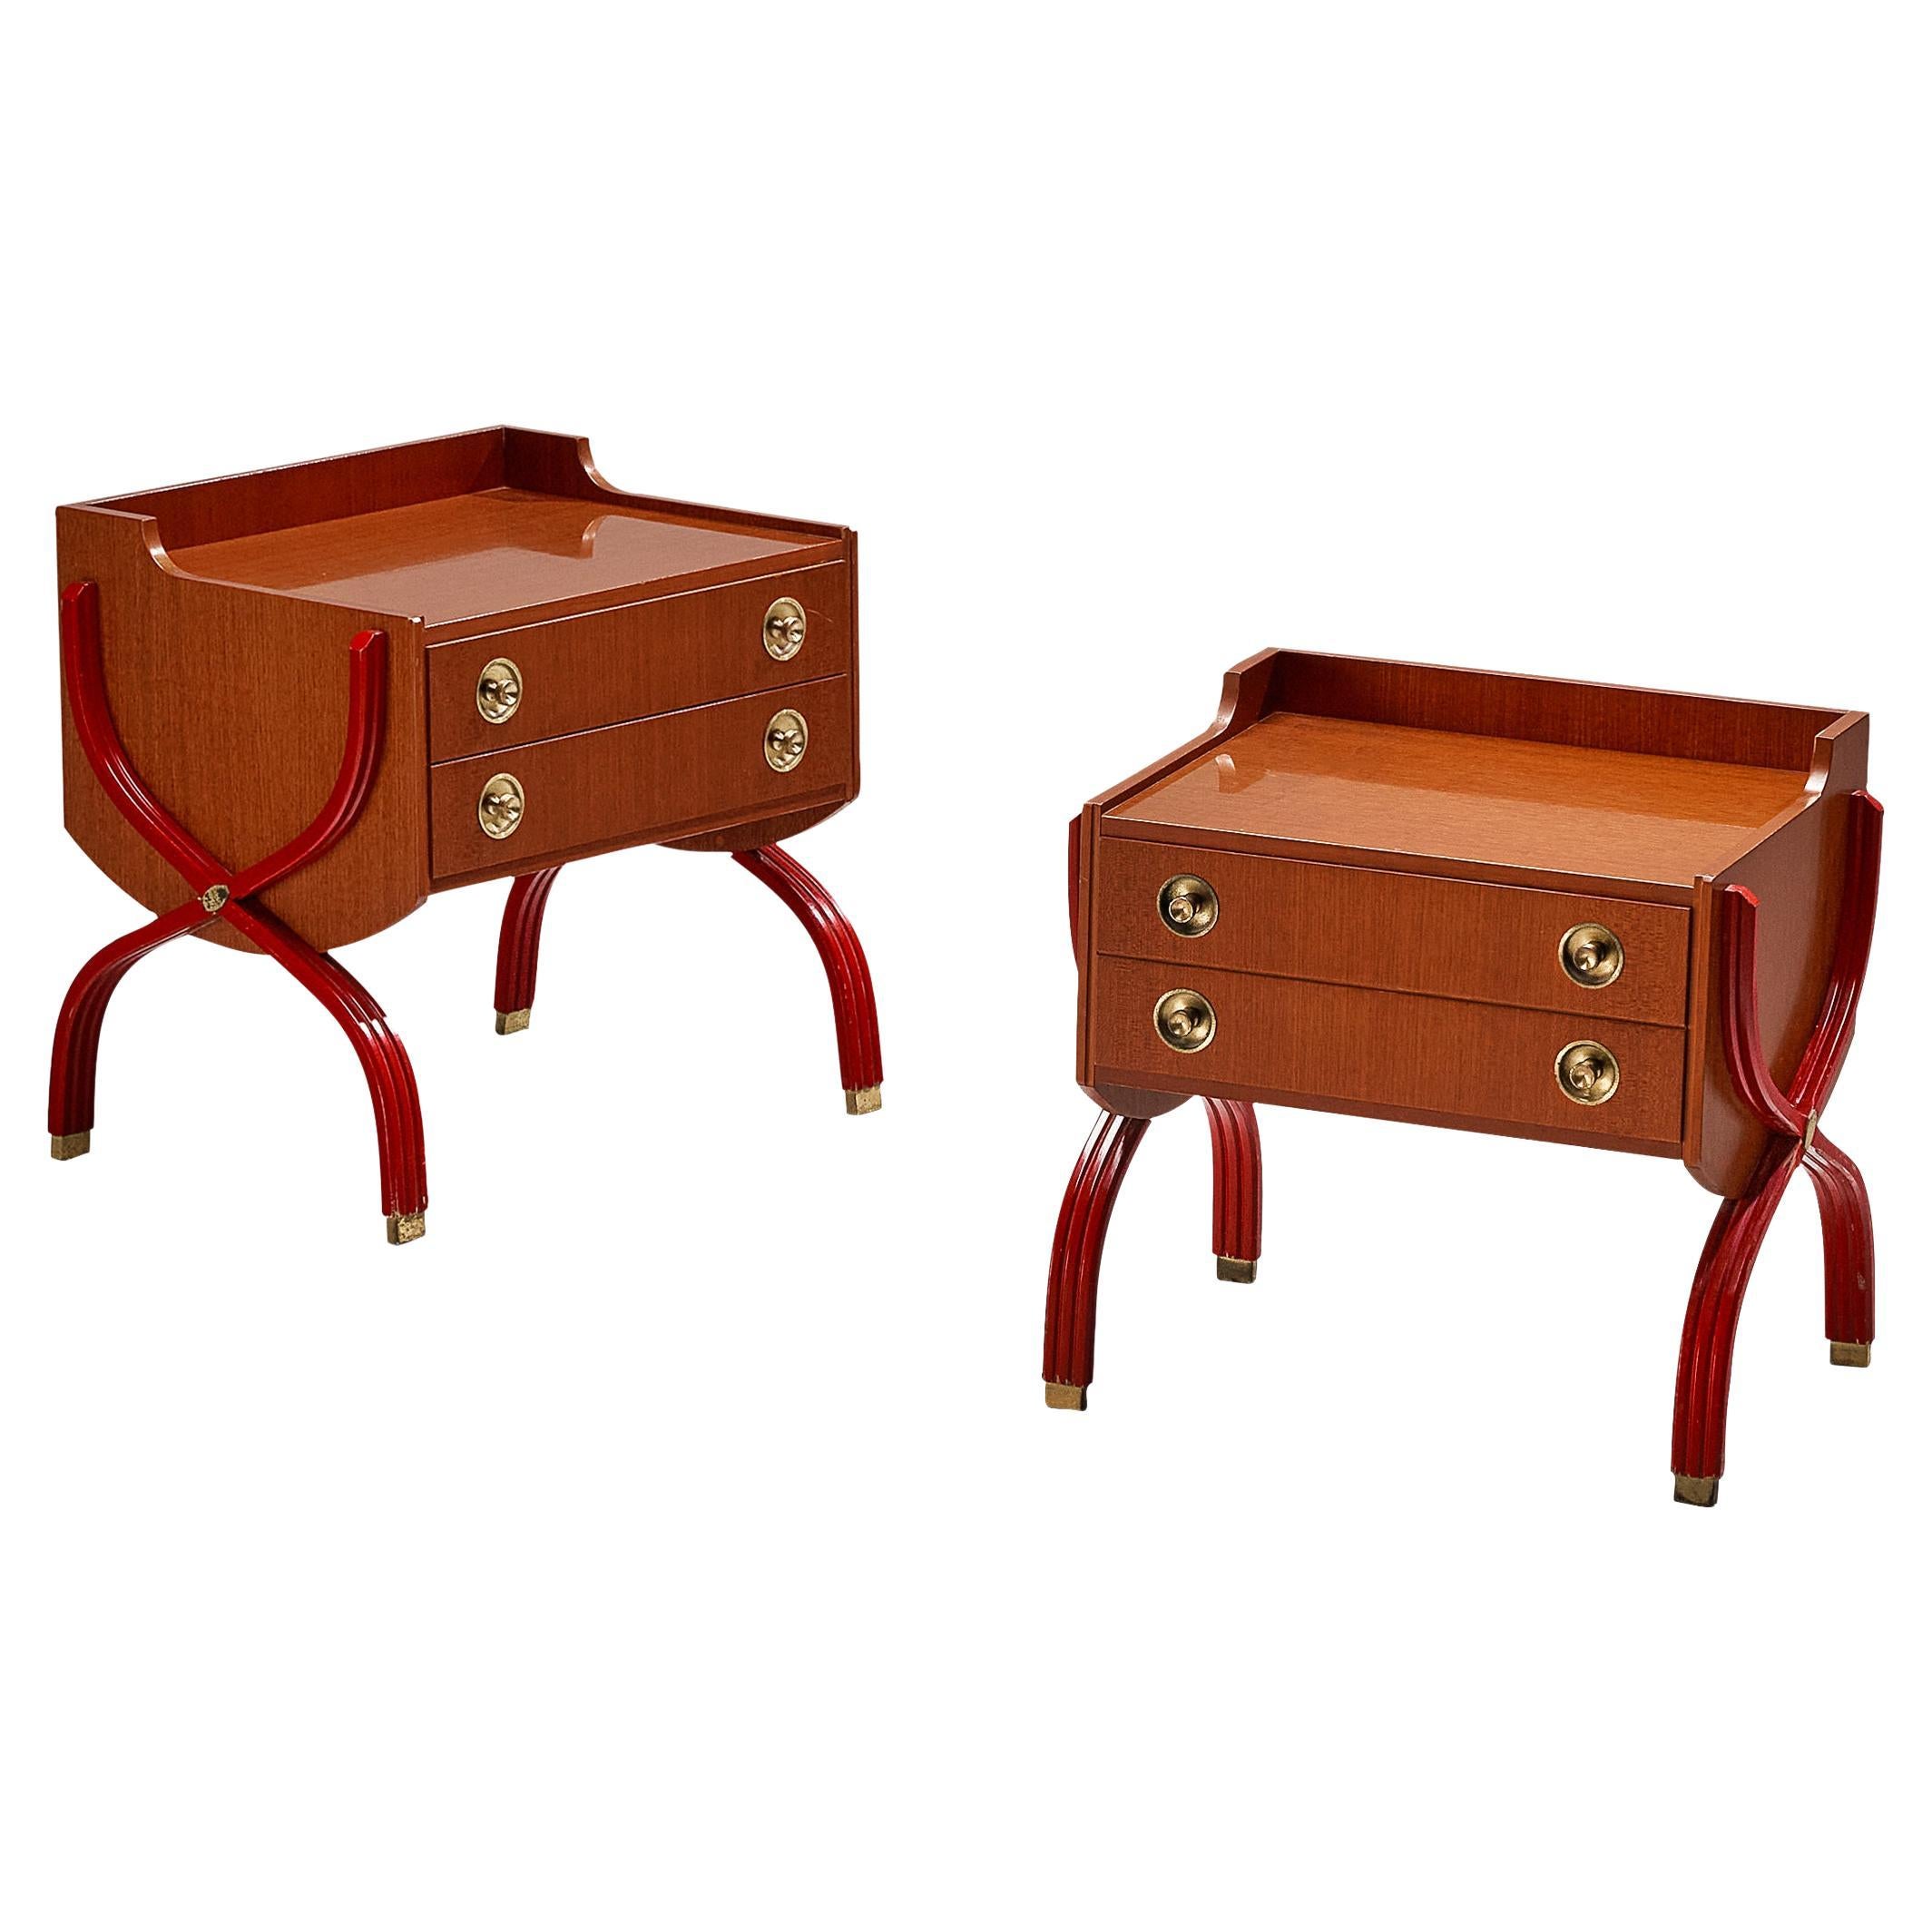  Tosi Arredamenti Pair of Cabinets or Night Stands in Mahogany and Brass 